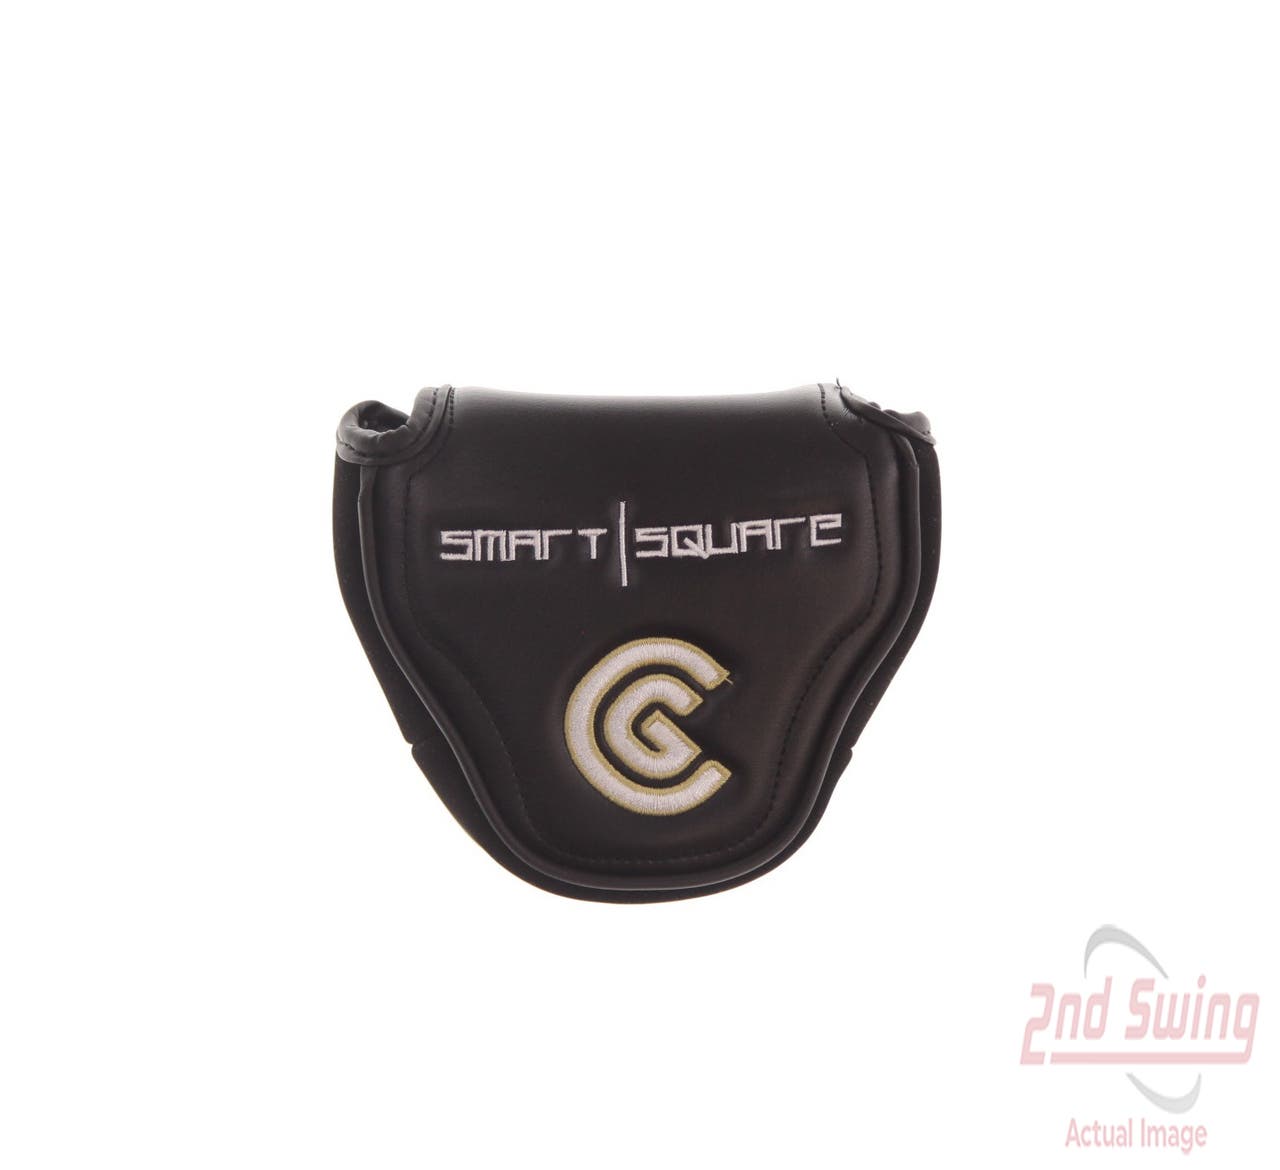 Cleveland 2013 Smart Square Mallet Putter Headcover Black/White/Gold